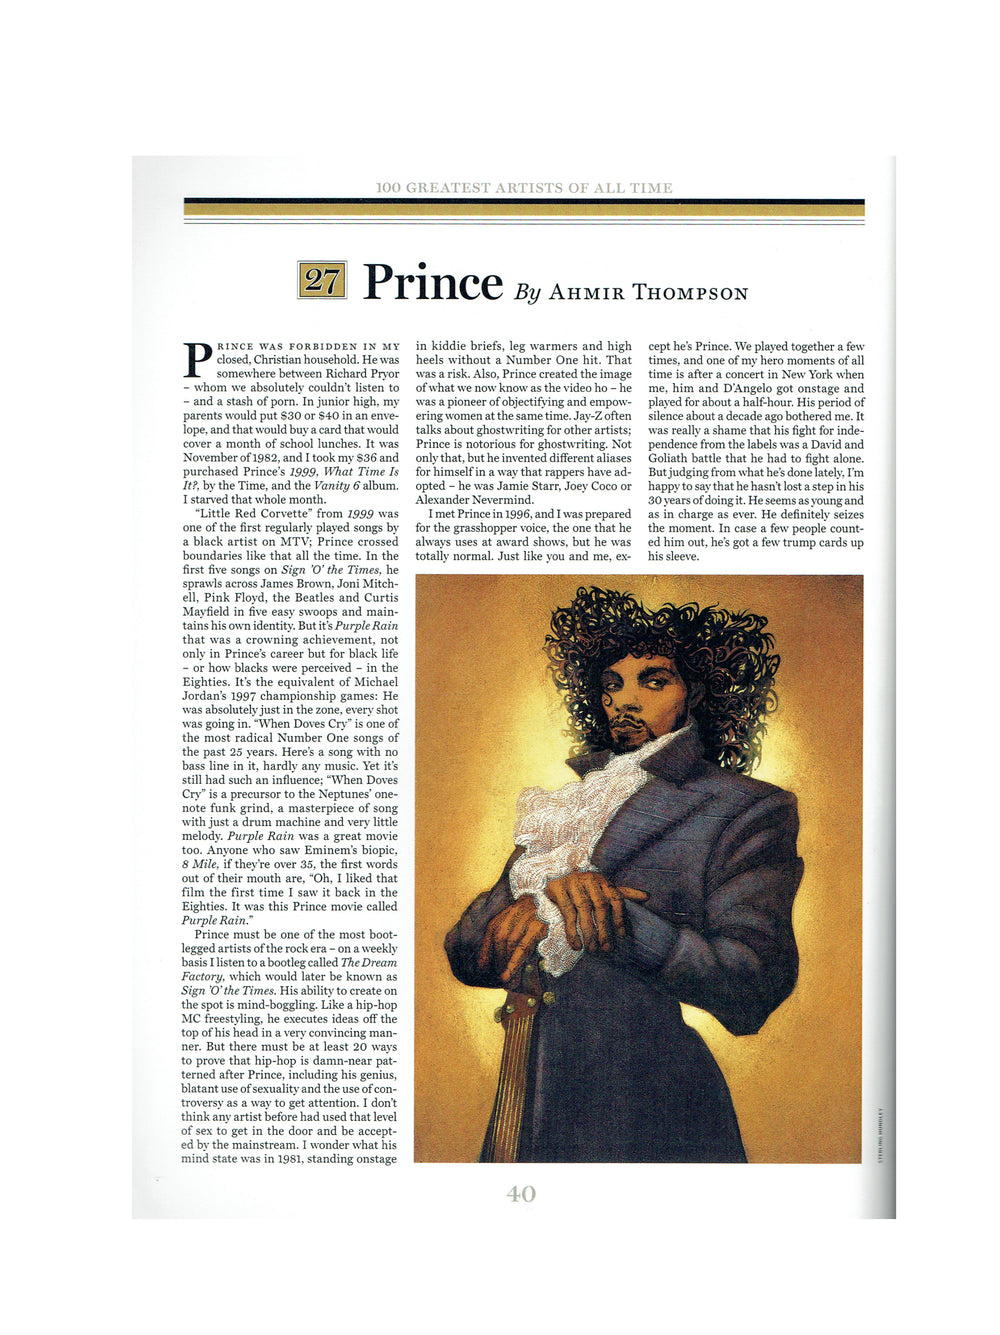 Rolling Stone Softback Book The Greatest Artists Of All Time Inc Prince